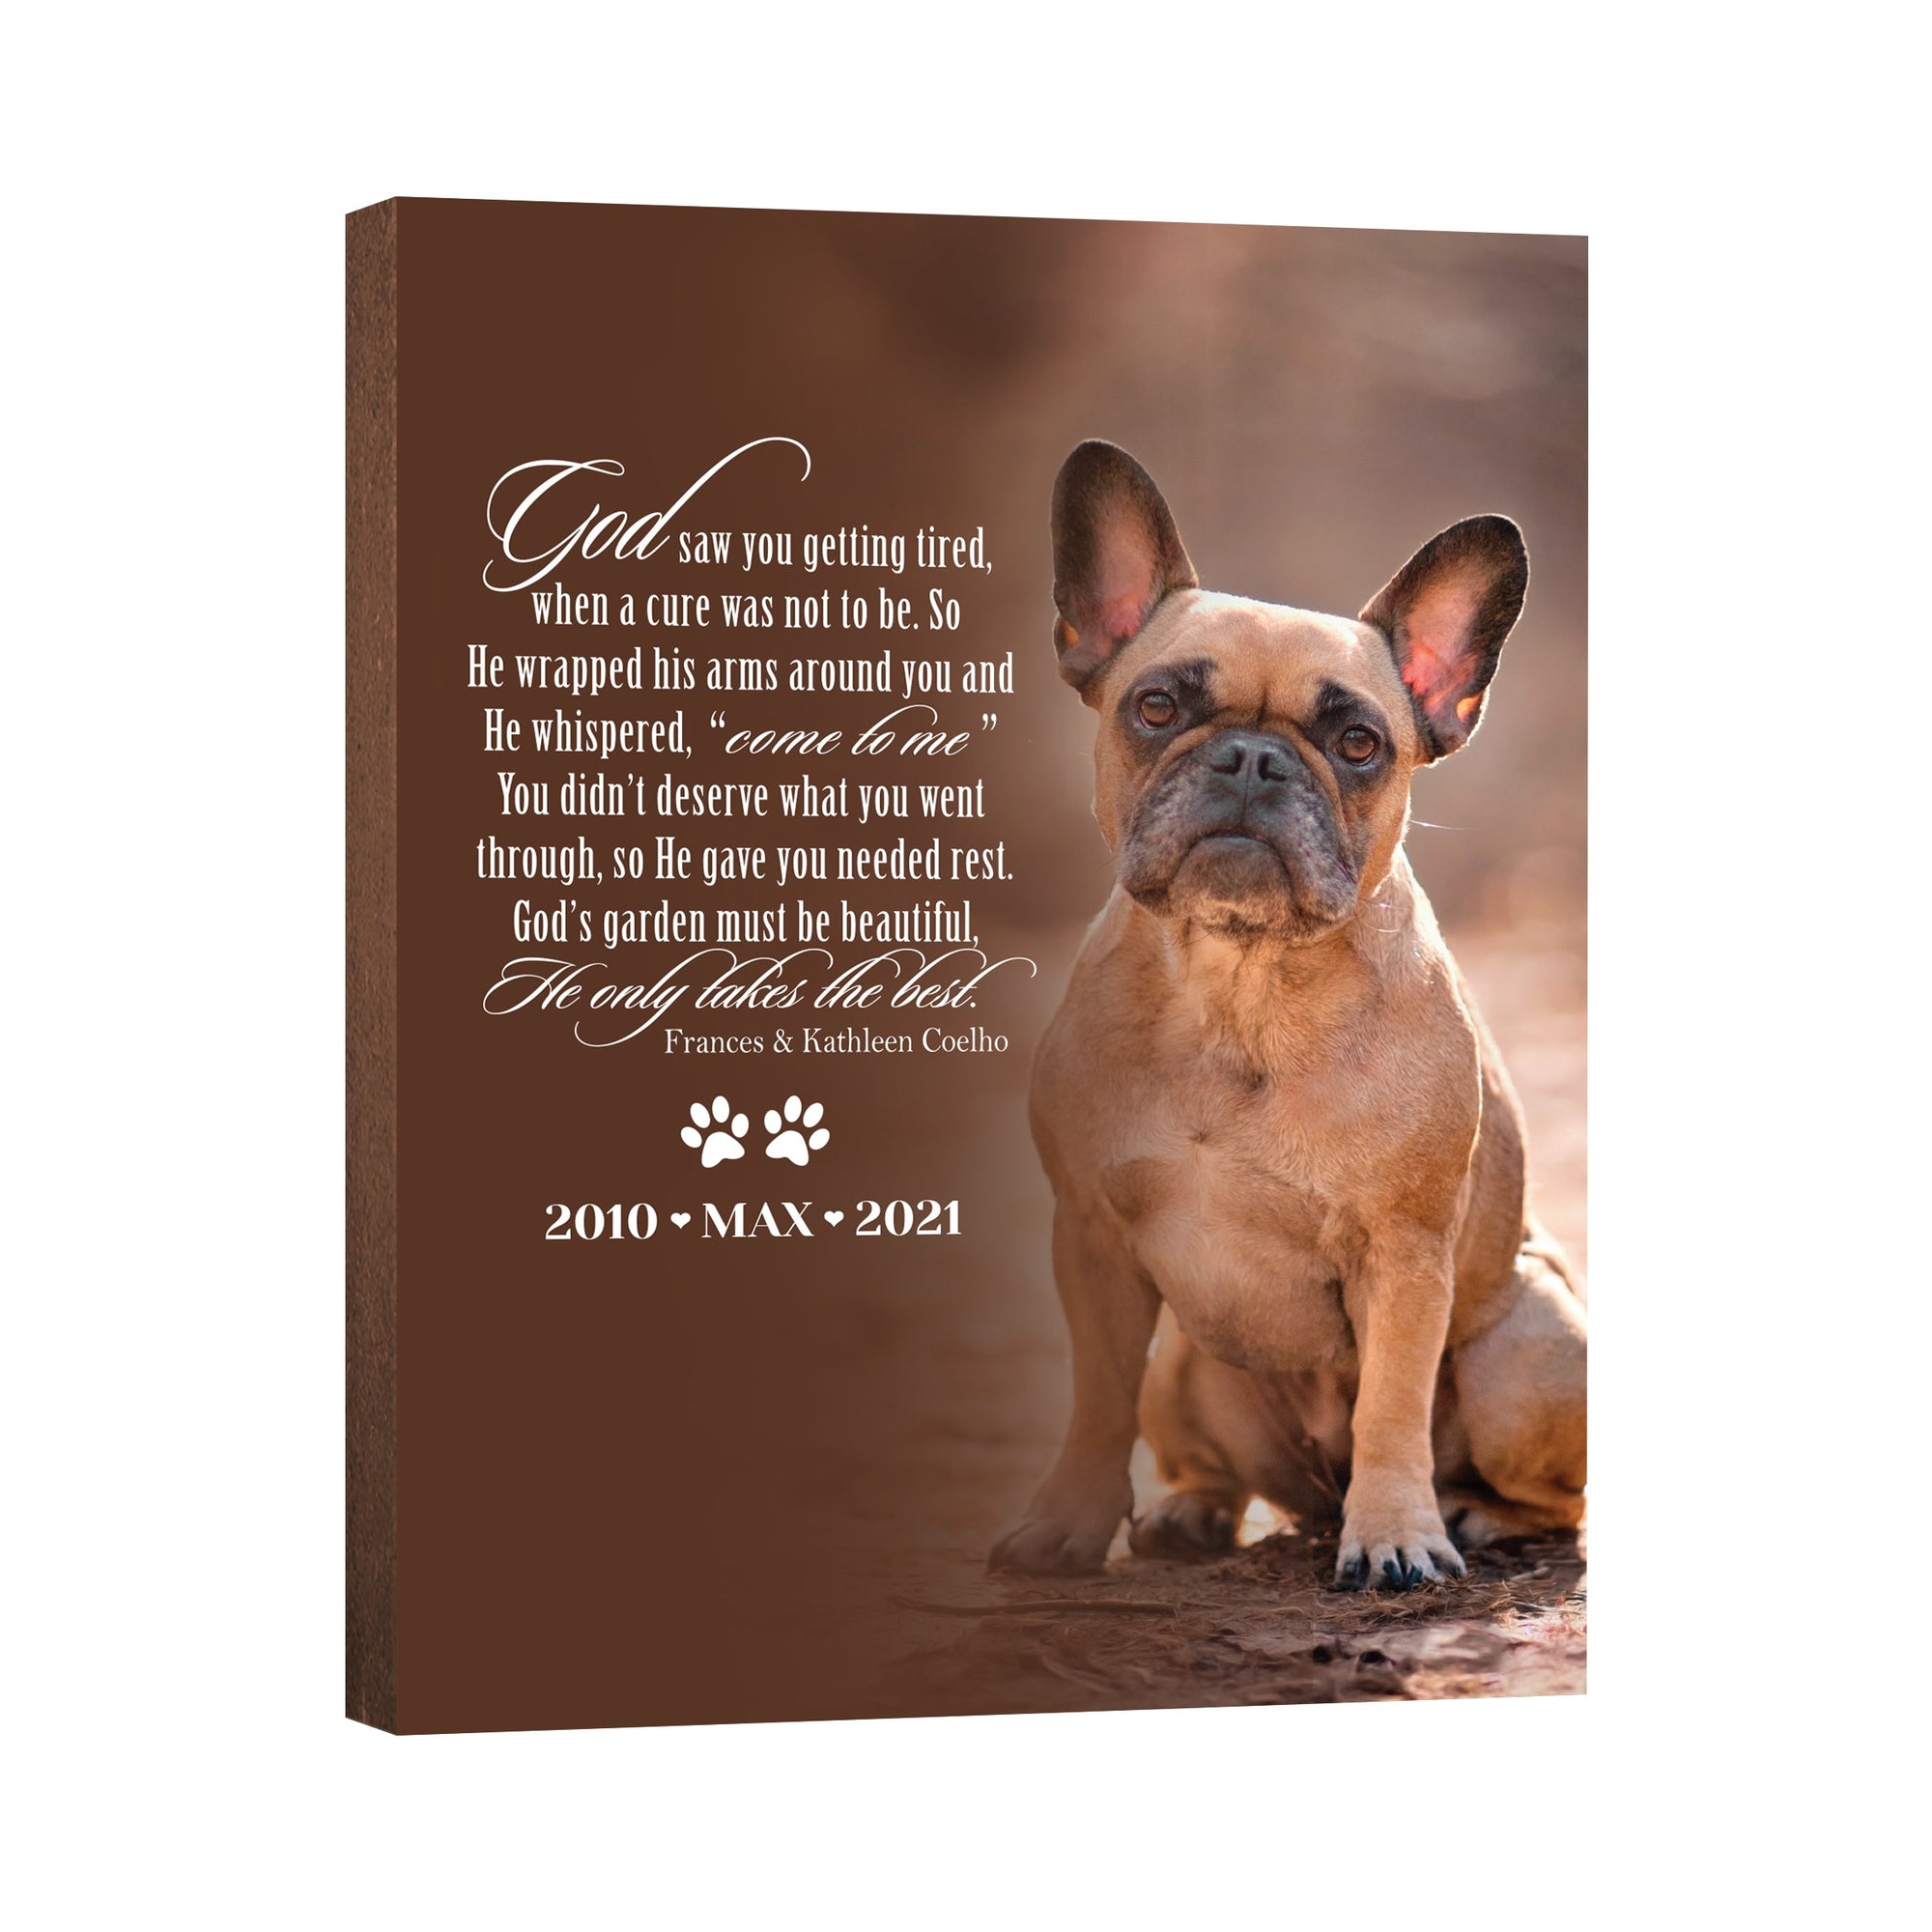 Pet Memorial Custom Photo Wall Plaque Décor - God Saw You Getting Tired